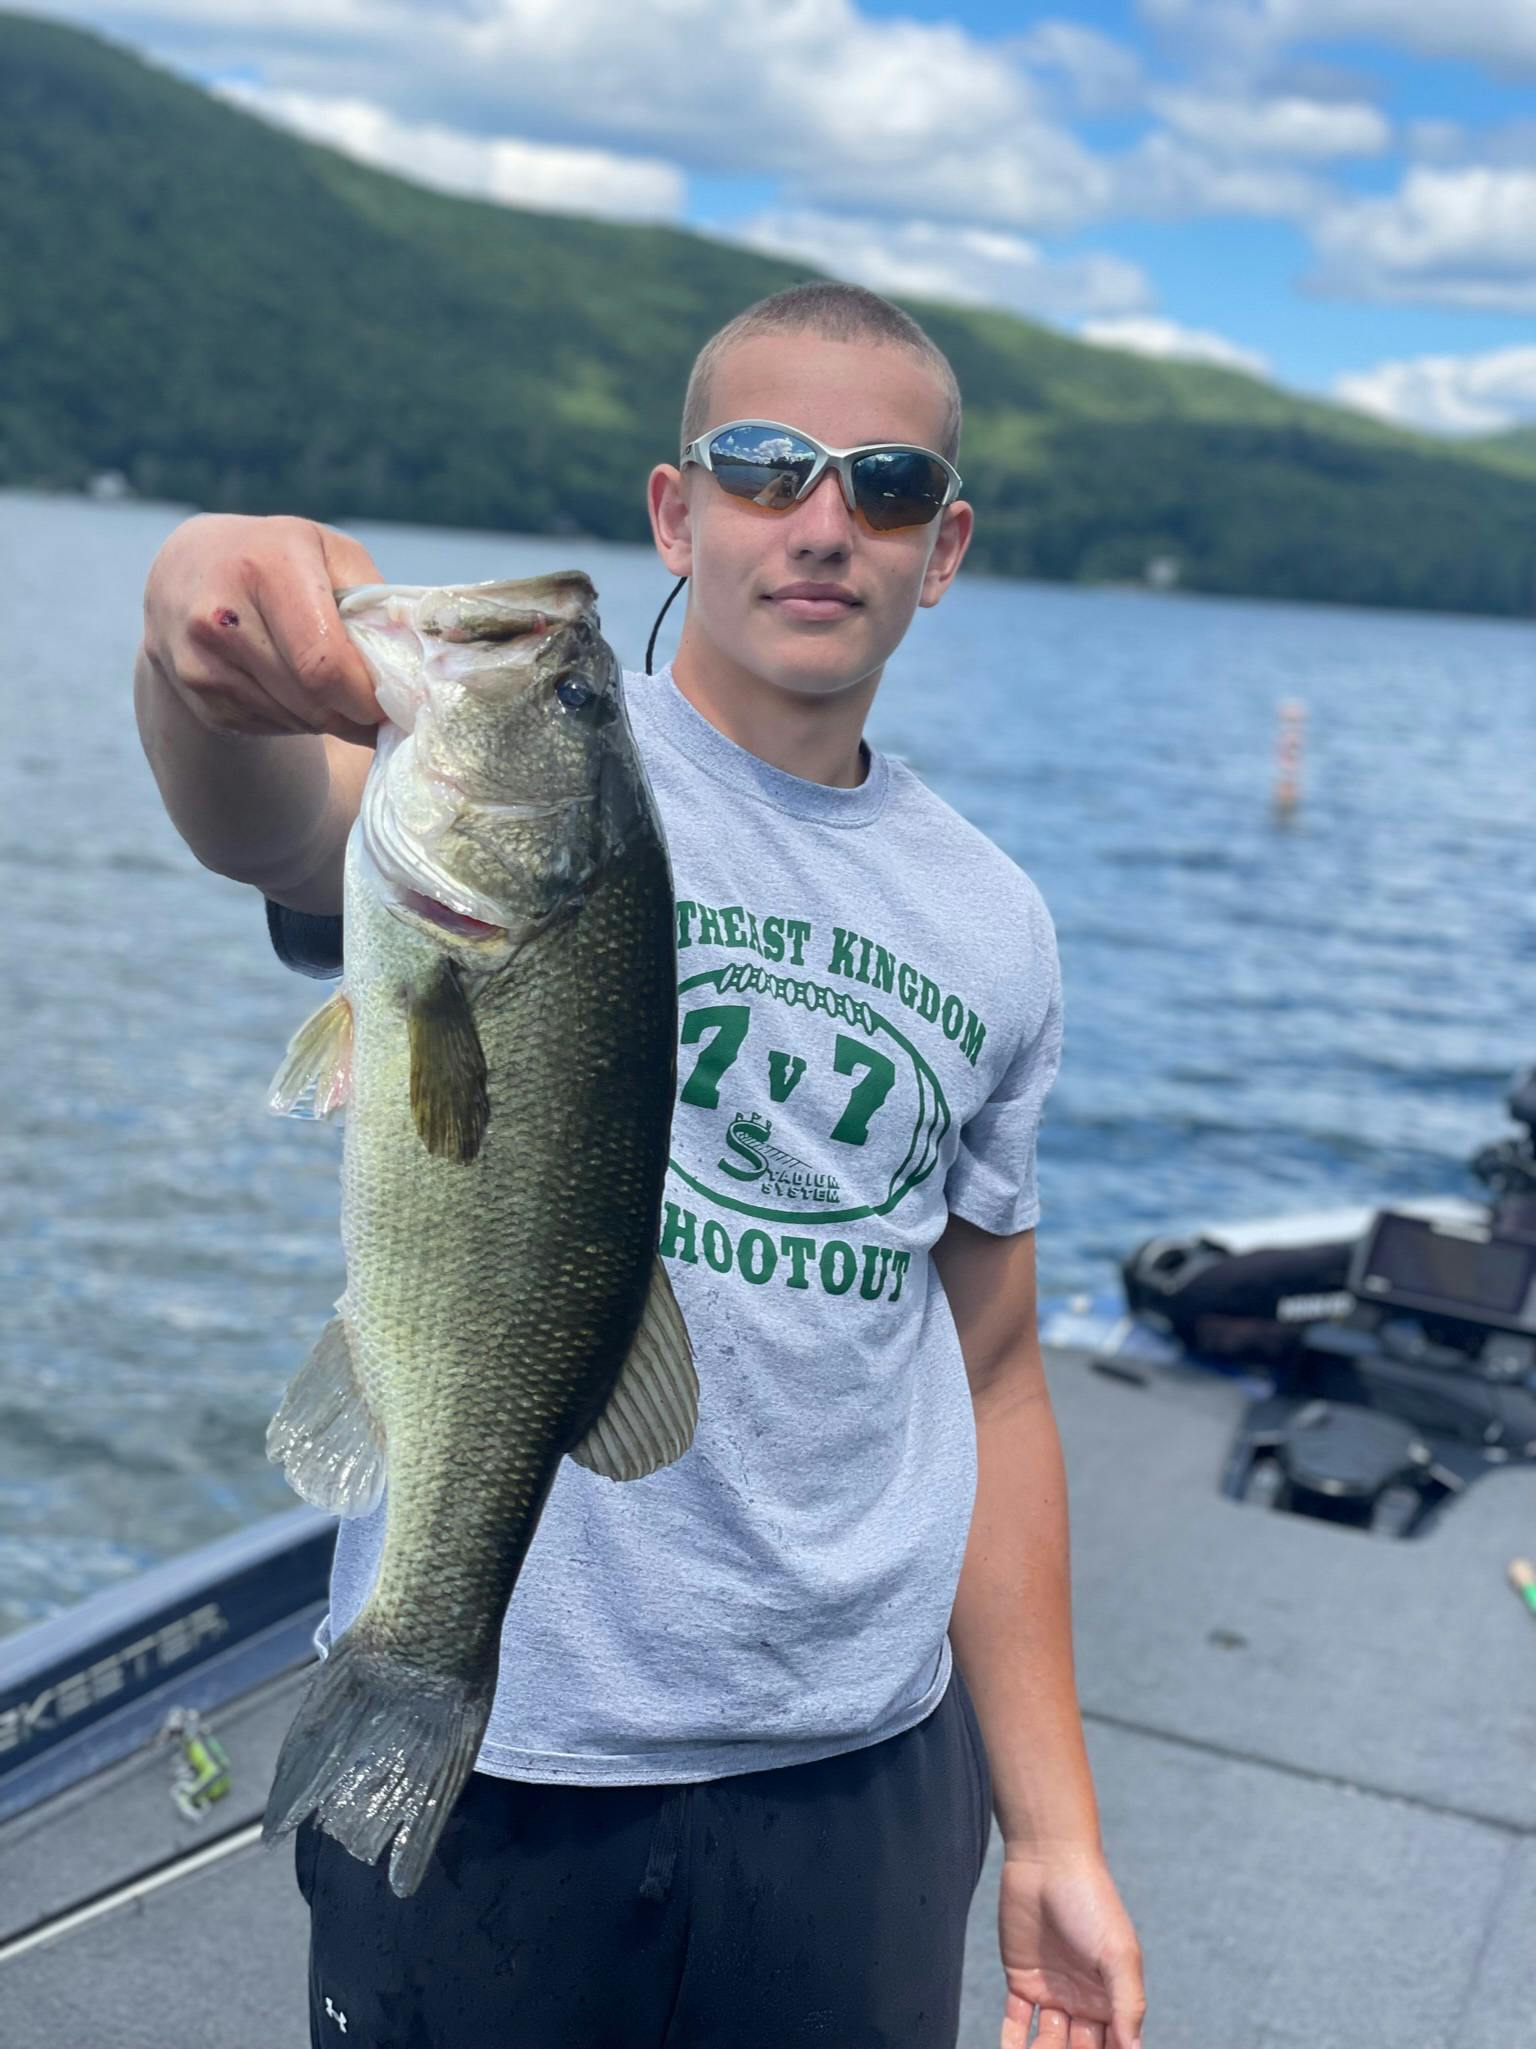 younger man holds largemouth bass on boat while wearing sunglasses, grey shirt, and black shorts